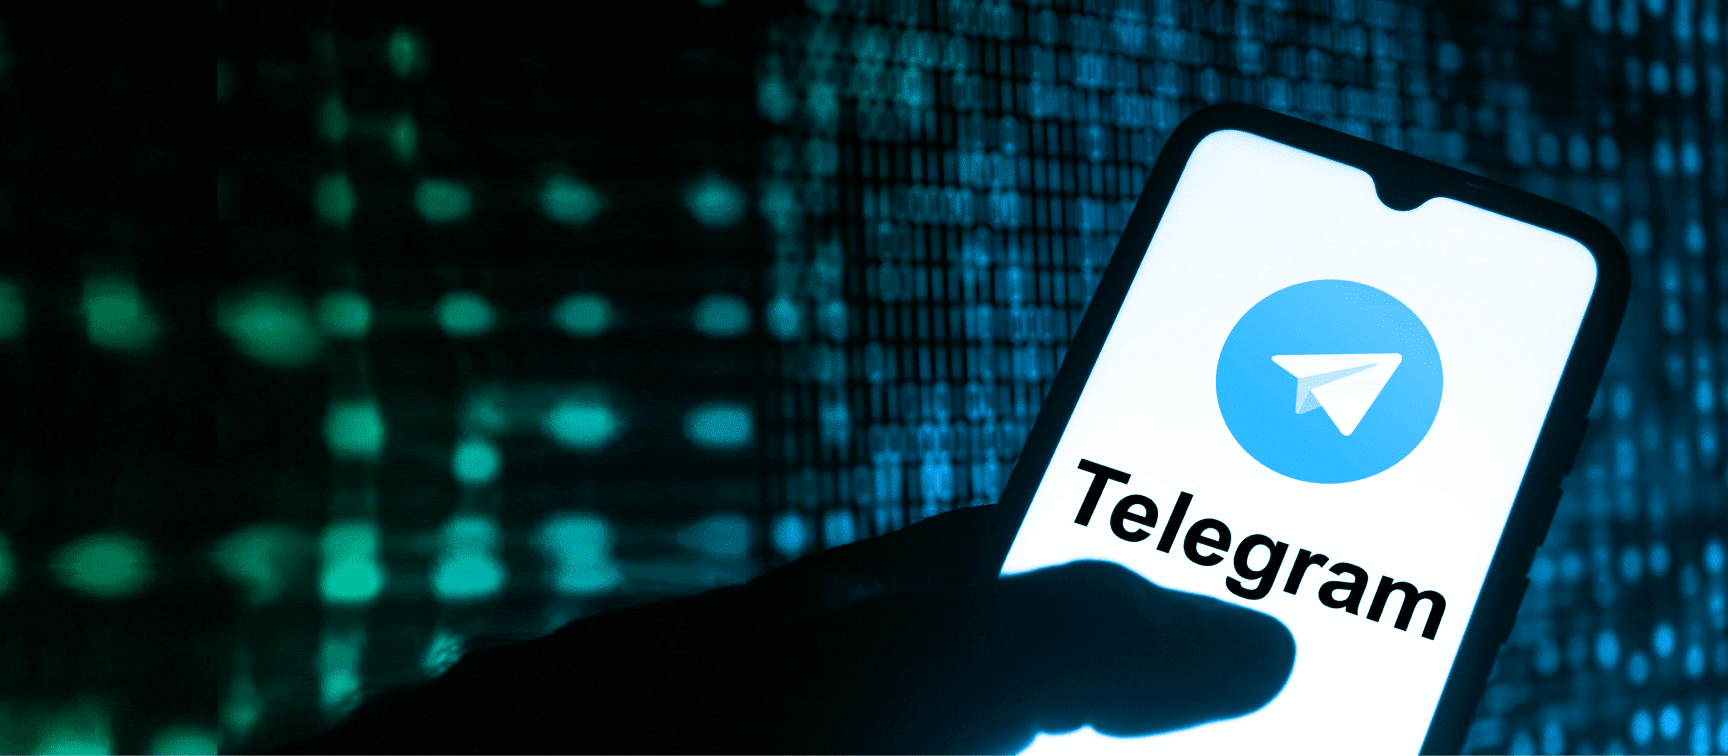 Hackers eye wealthy crypto funds using telegram chats 